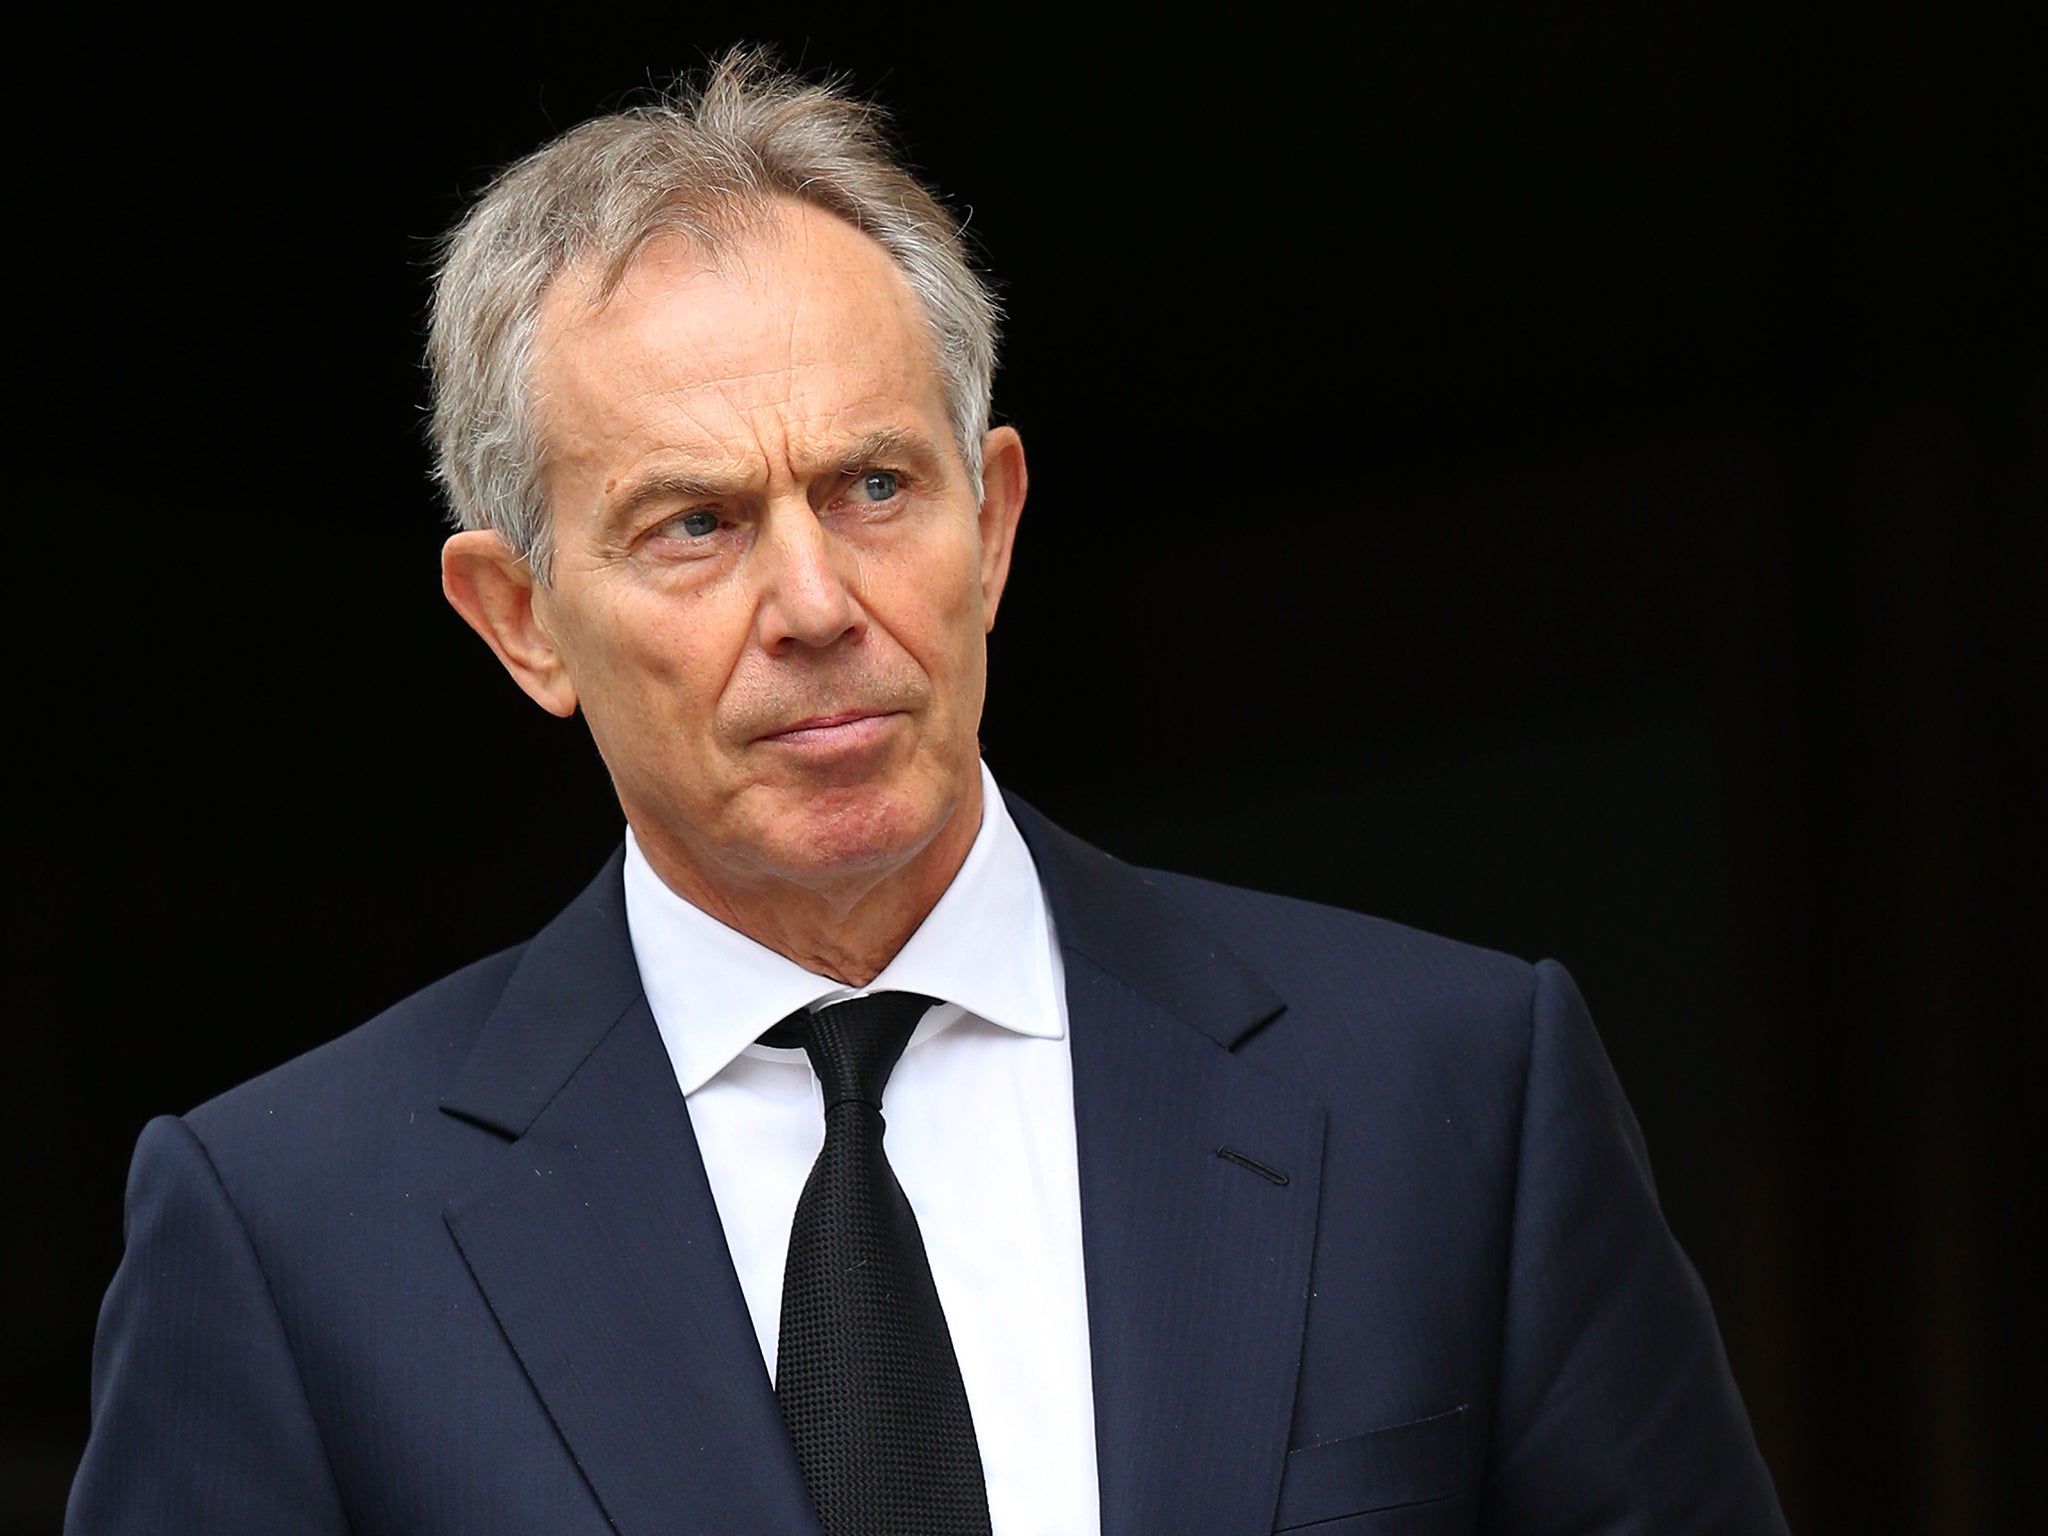 Tony Blair's government introduced BIDs in 2004 and there are now 185 in the UK that secure more than £50m annually